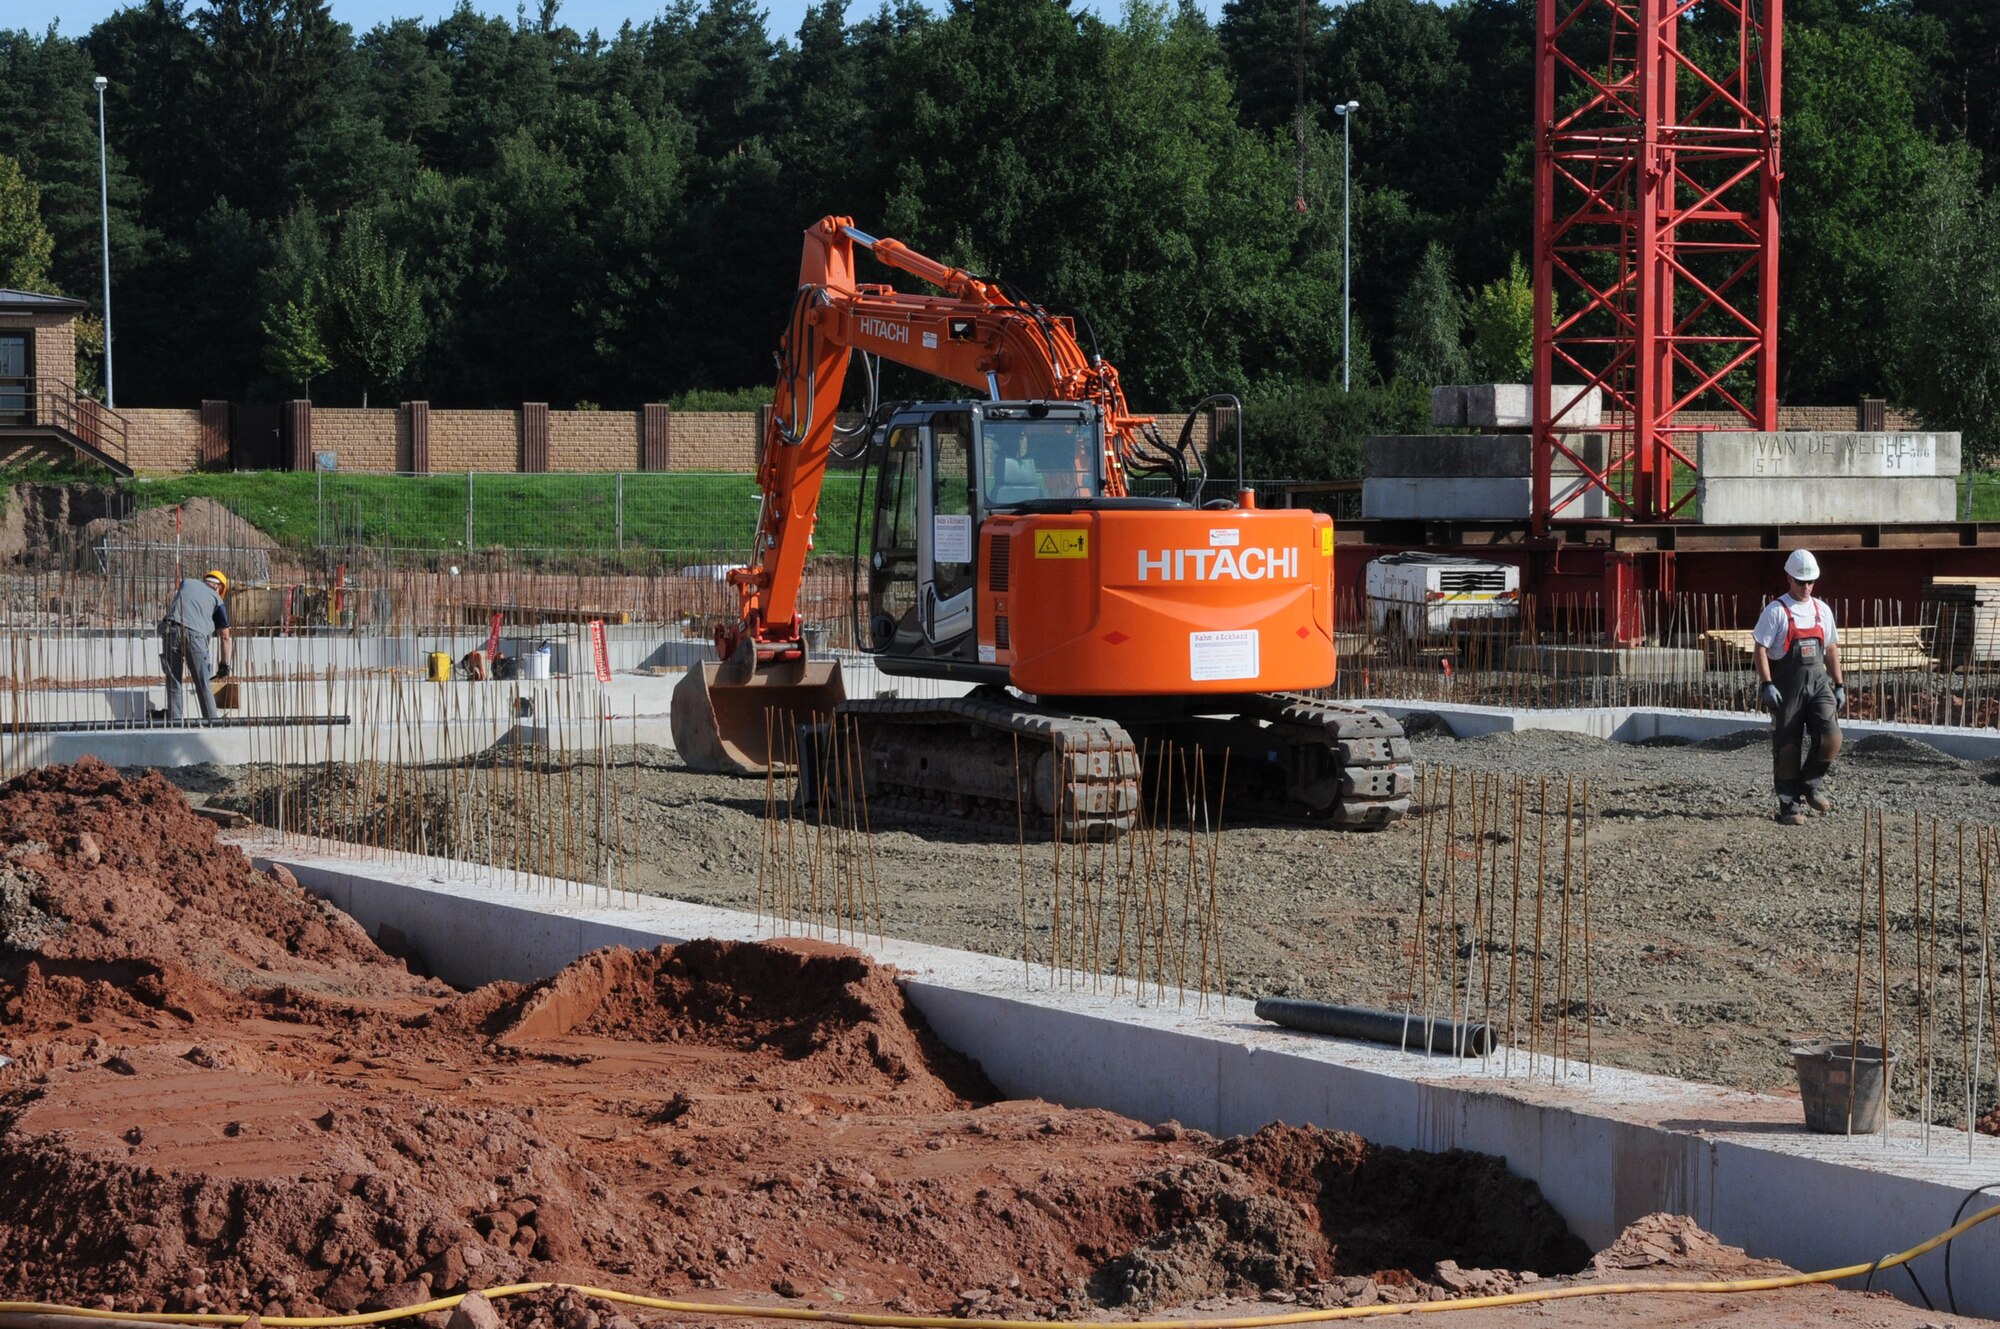 Construction for the new Joint Mobility Processing Center is underway on Ramstein Air Base, Germany, July 29, 2009. The JMPC processes over 500 military members per month for deployments. (U.S. Air Force photo by Airman 1st Class Caleb Pierce)